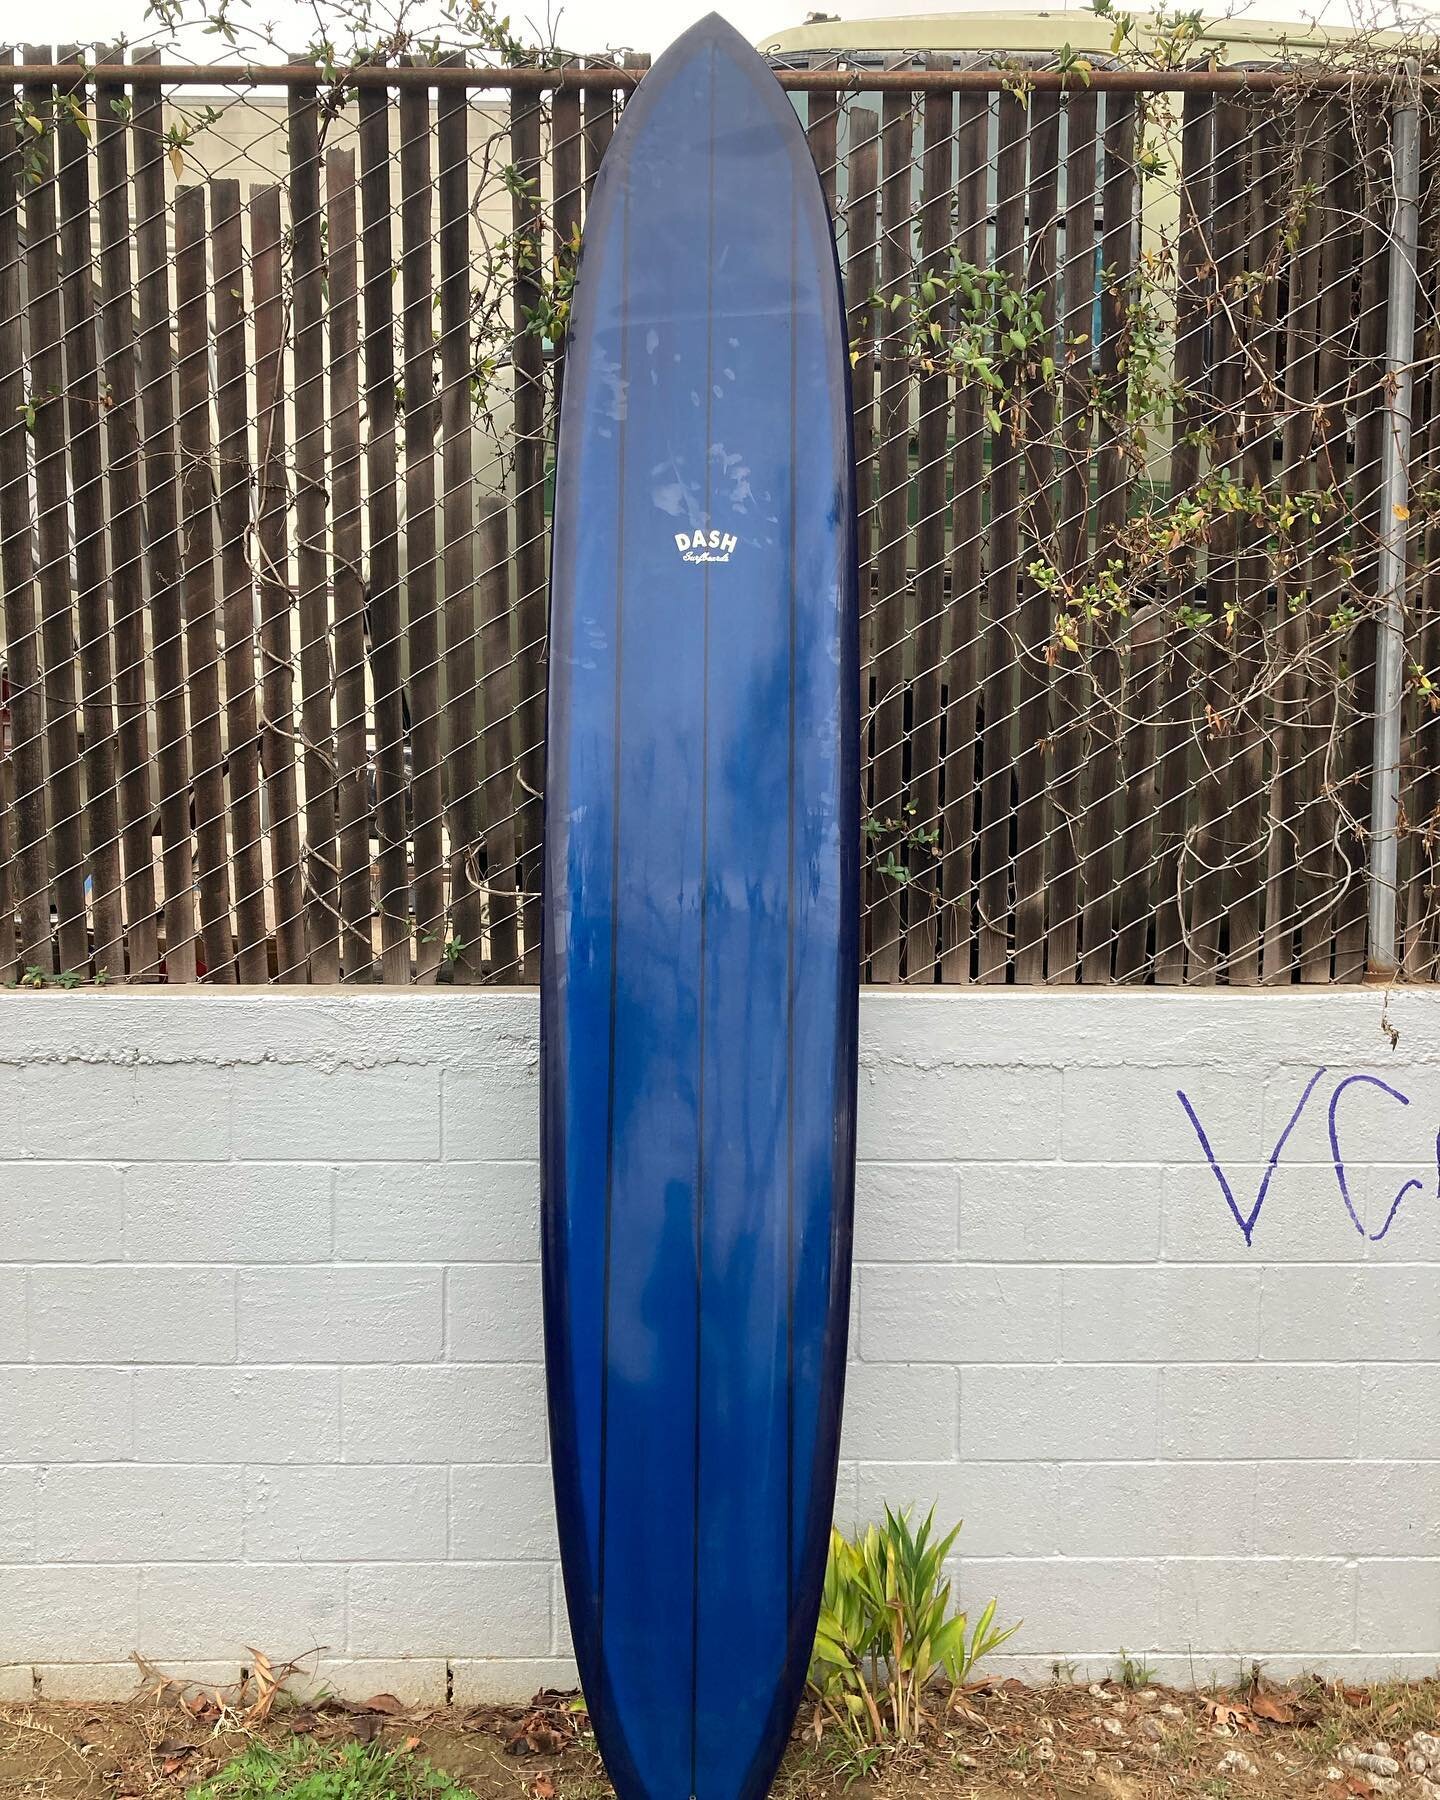 Stock 11&rsquo;0&rdquo; ros&eacute; glider available. Email info@dashsurfboards.com if interested.